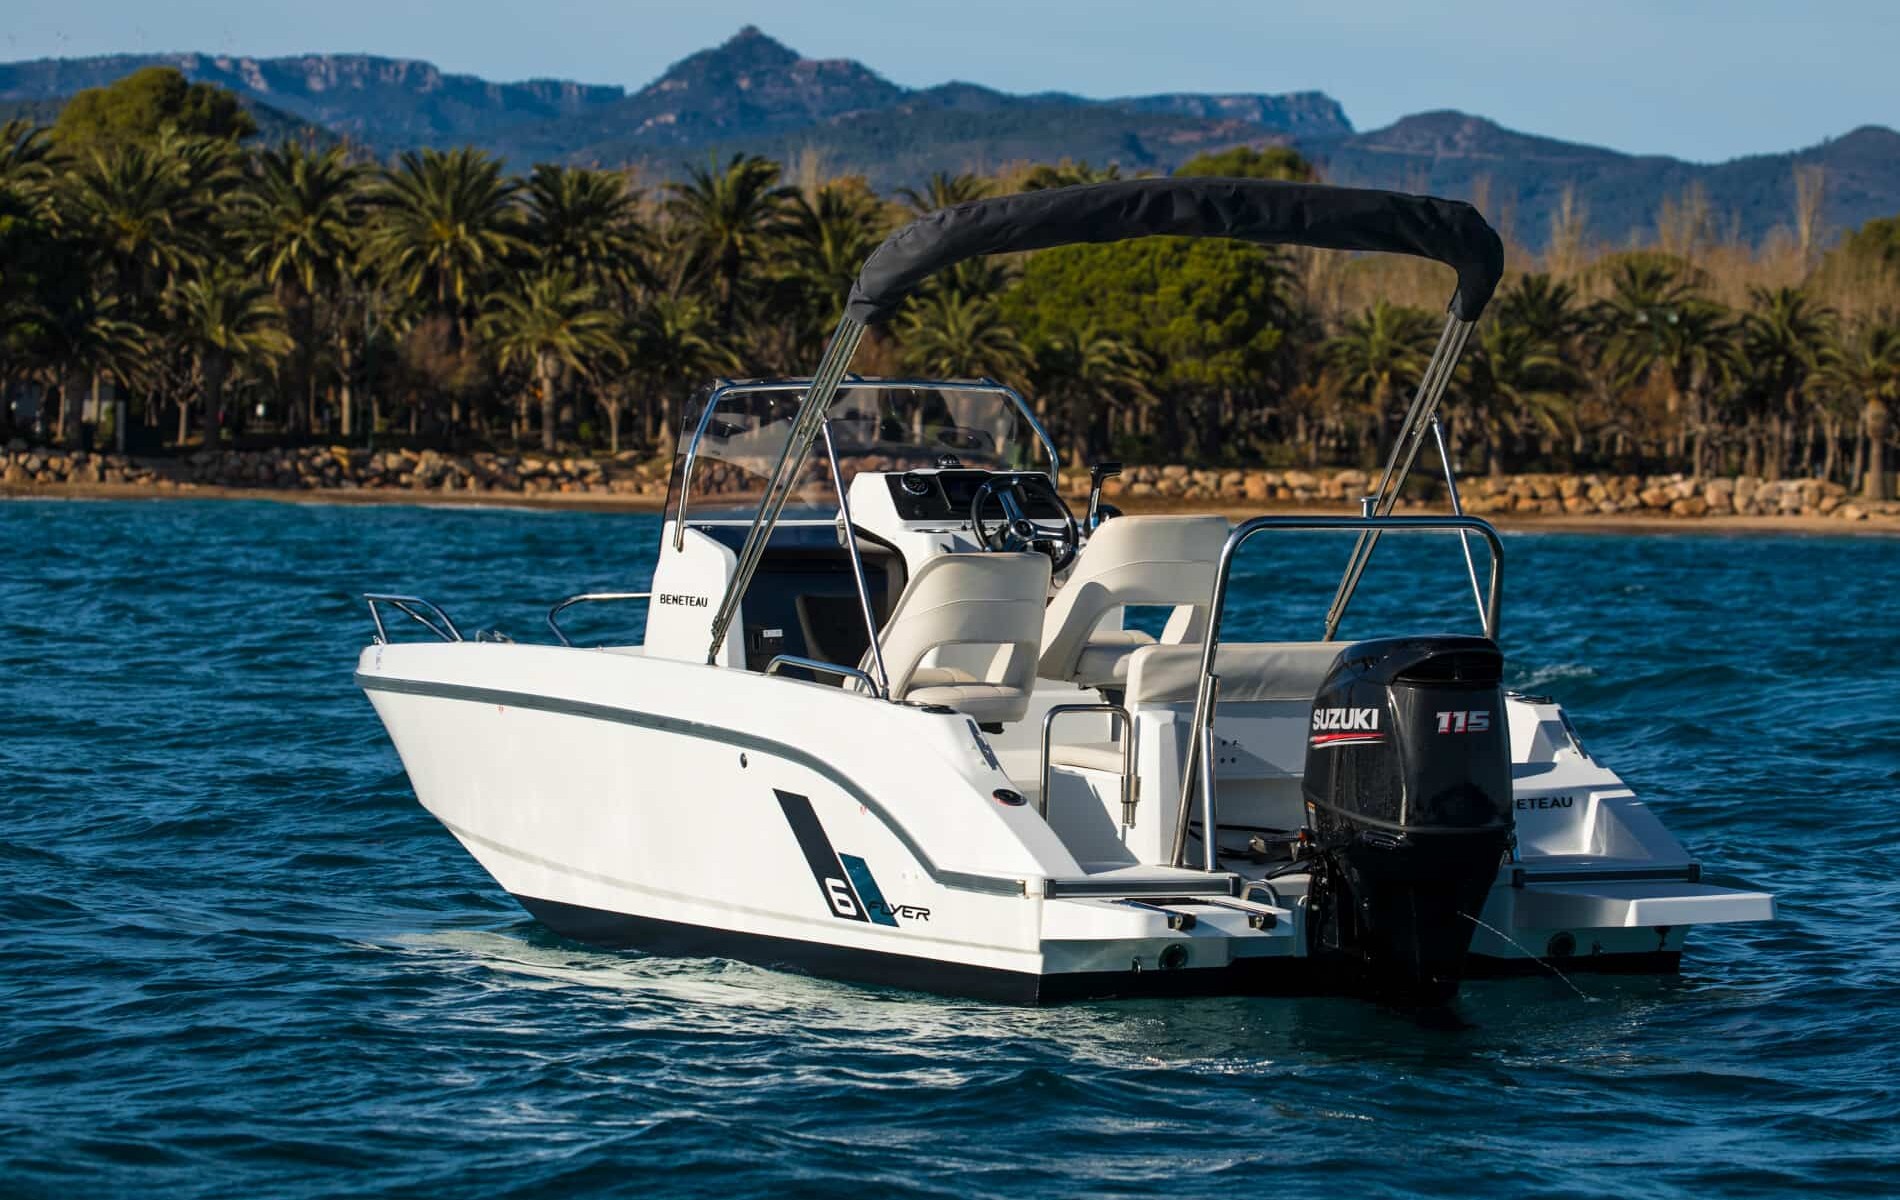 The FLYER 6 SPACEdeck by Beneteau Outboard